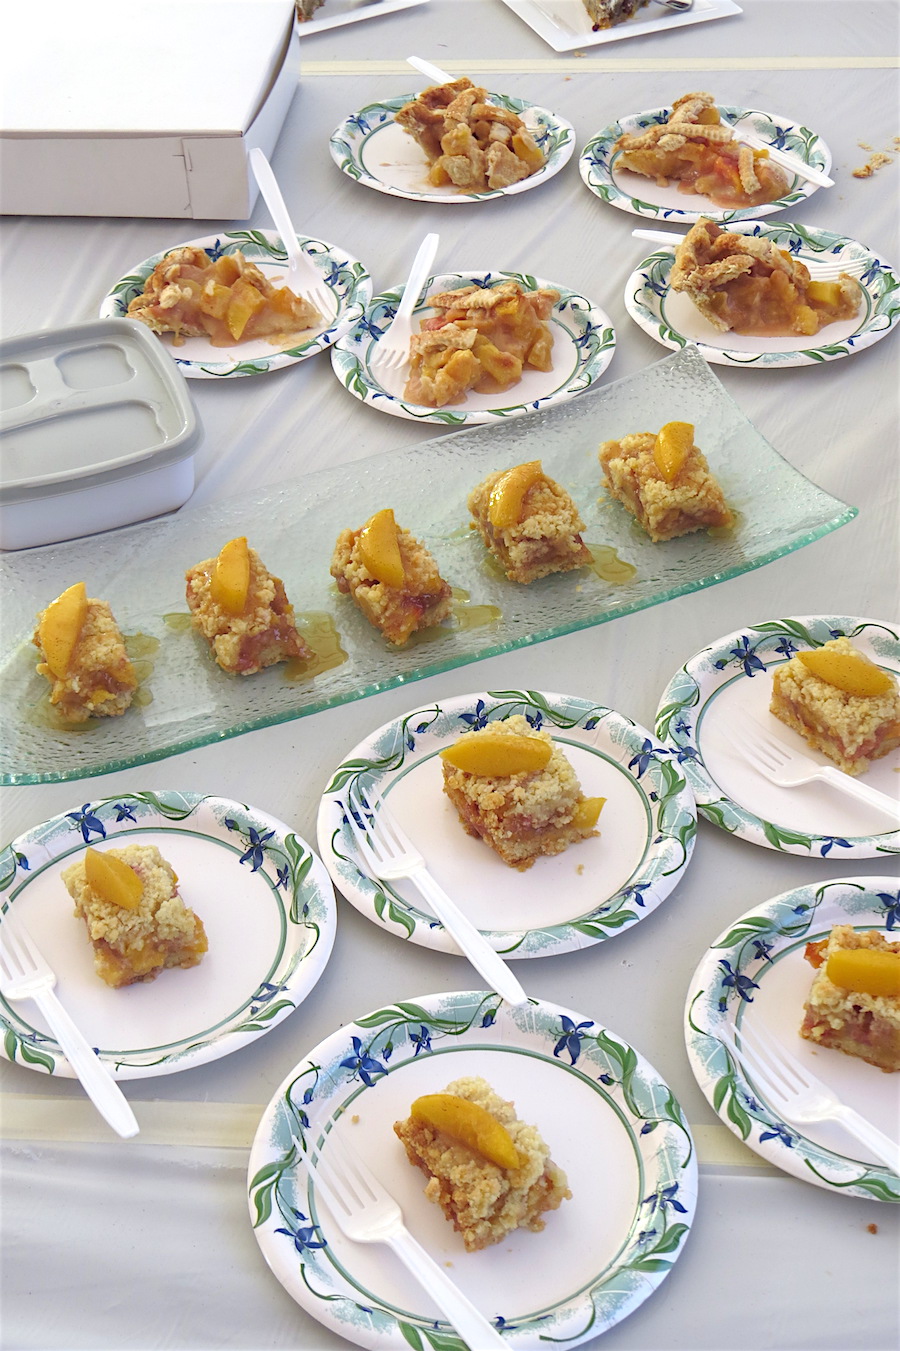 A sampling of peach dishes.